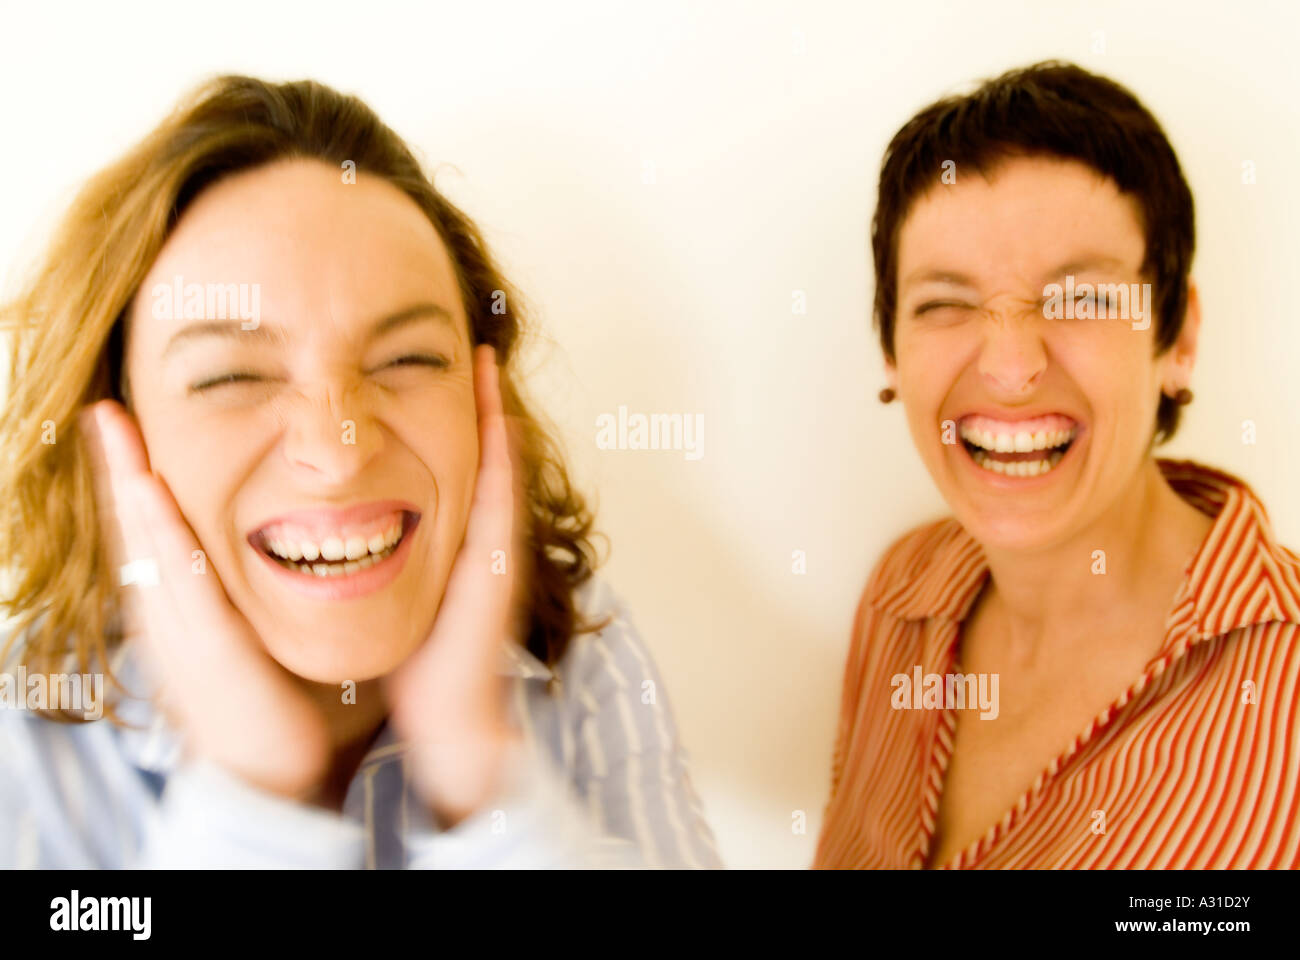 Two women looking at the camera and smiling Stock Photo